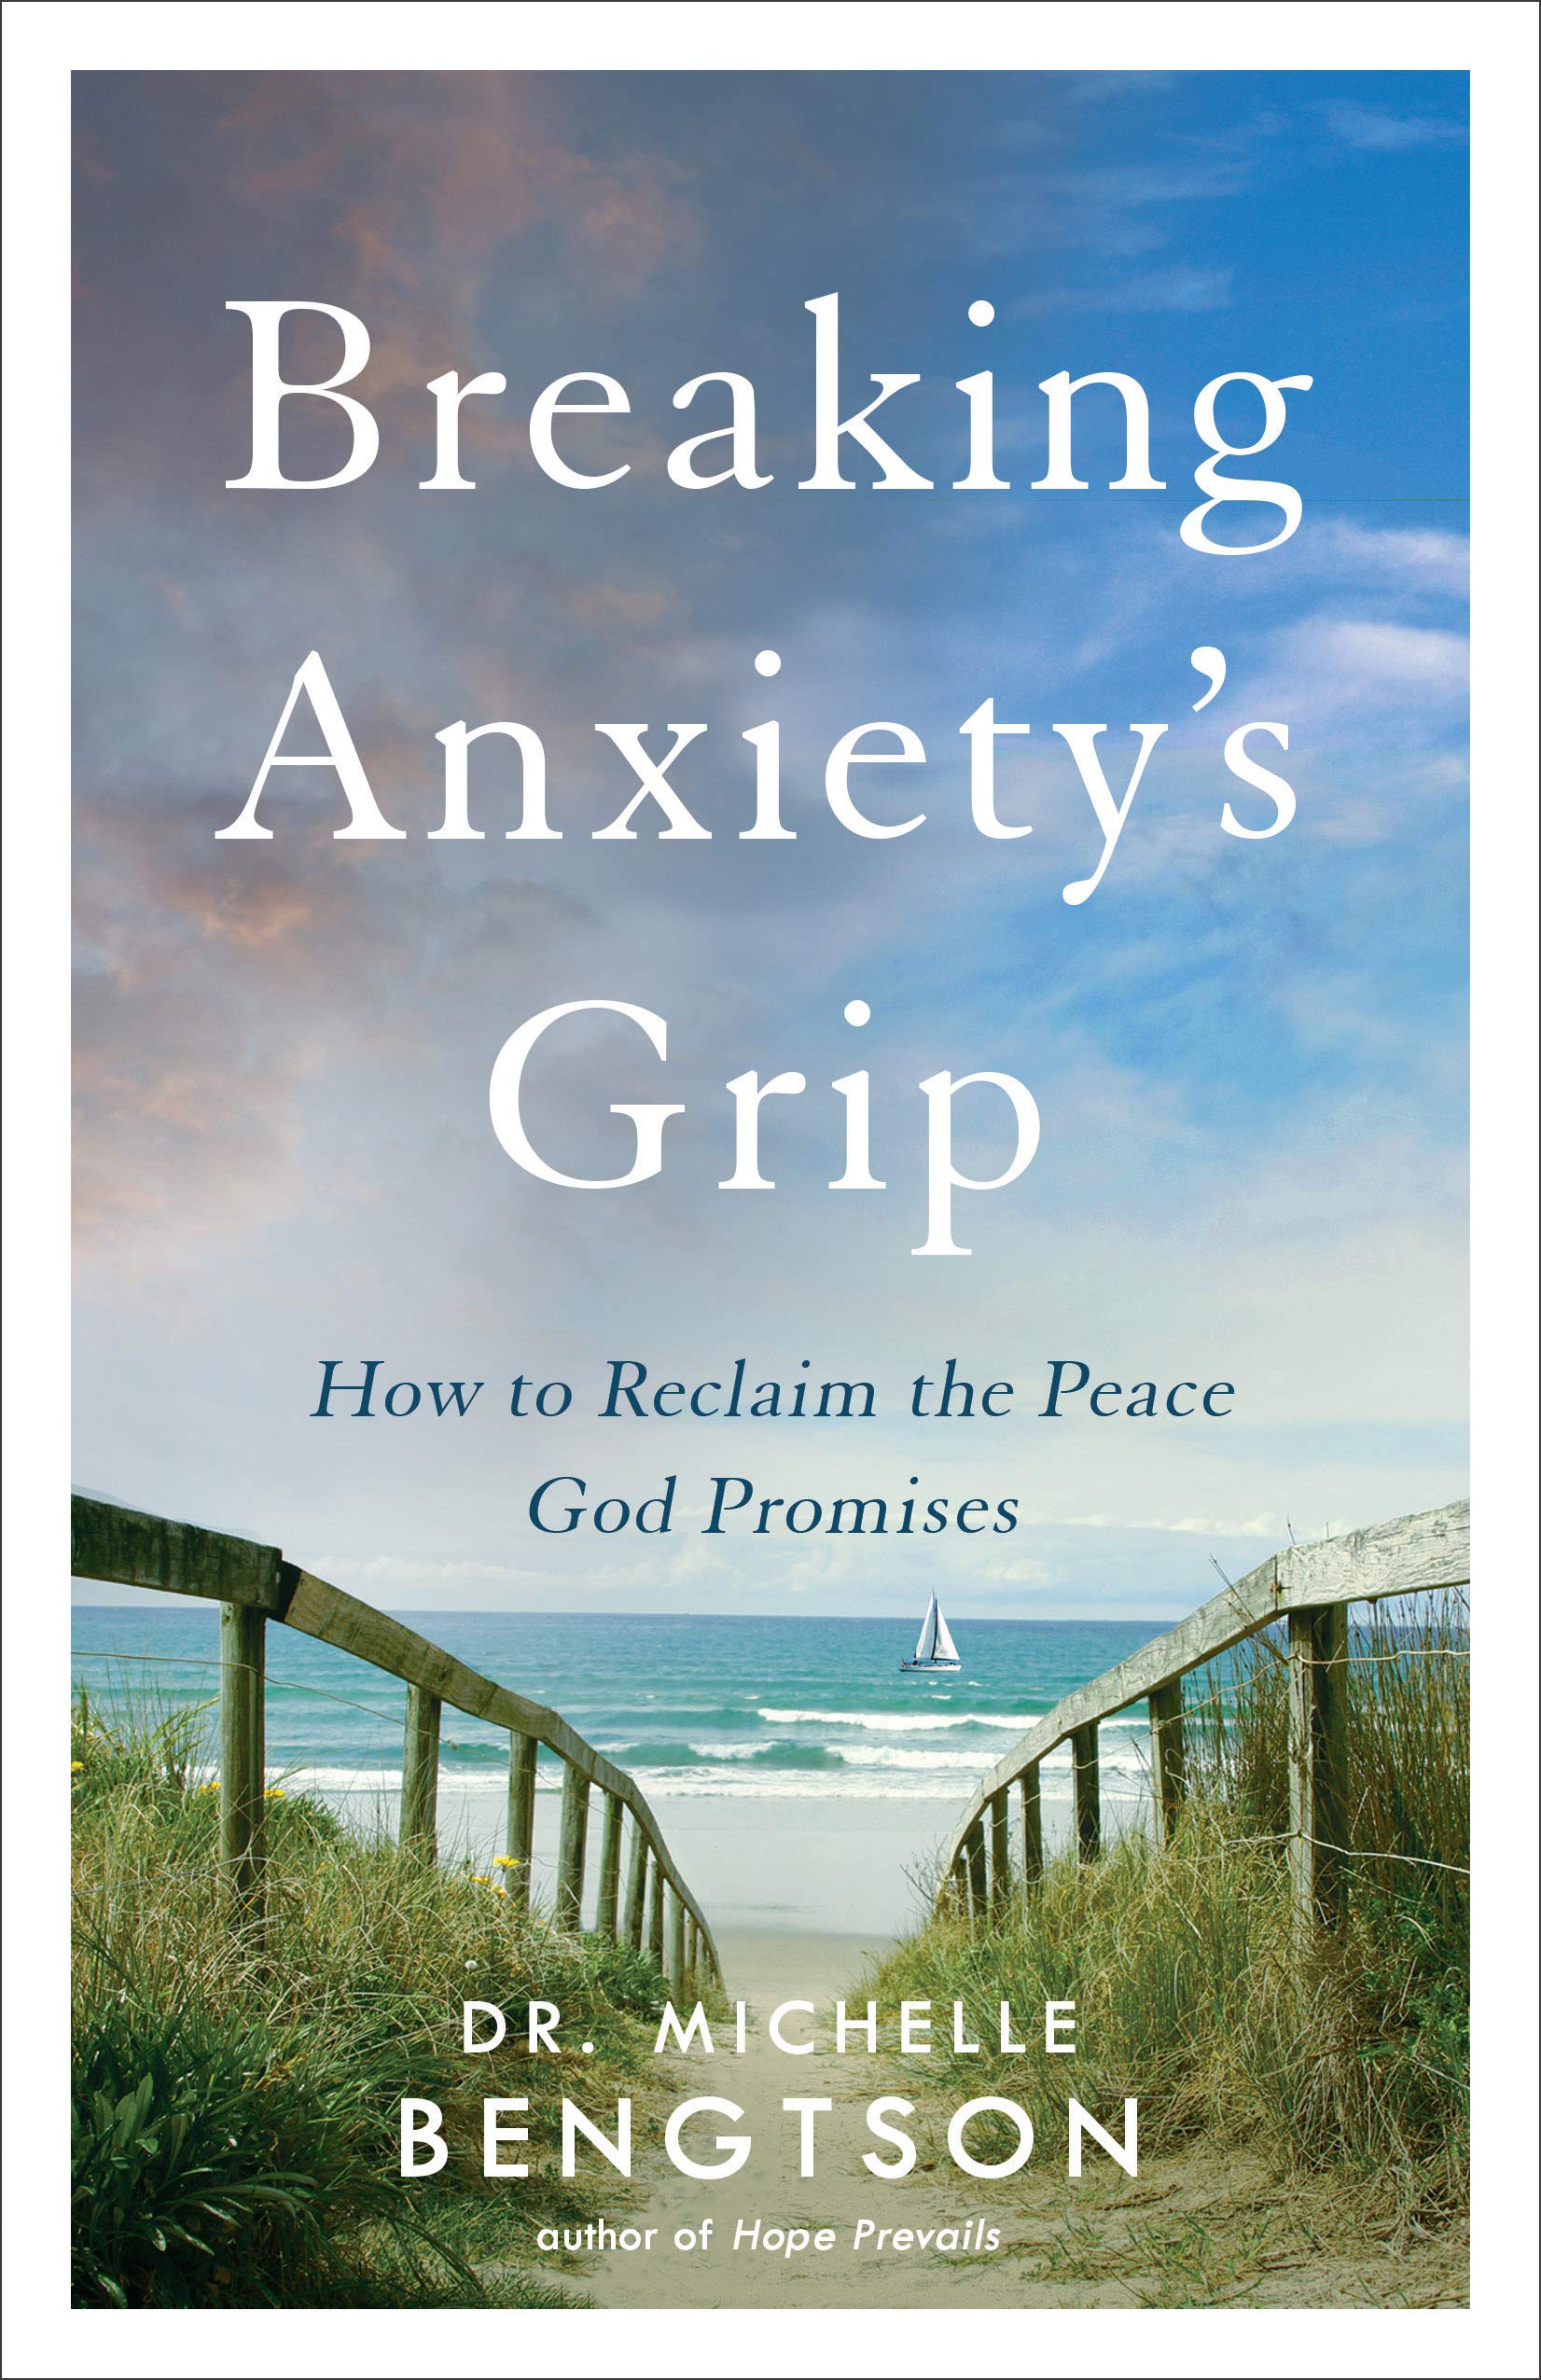 Breaking Anxiety's Grip by Michelle Bengtson